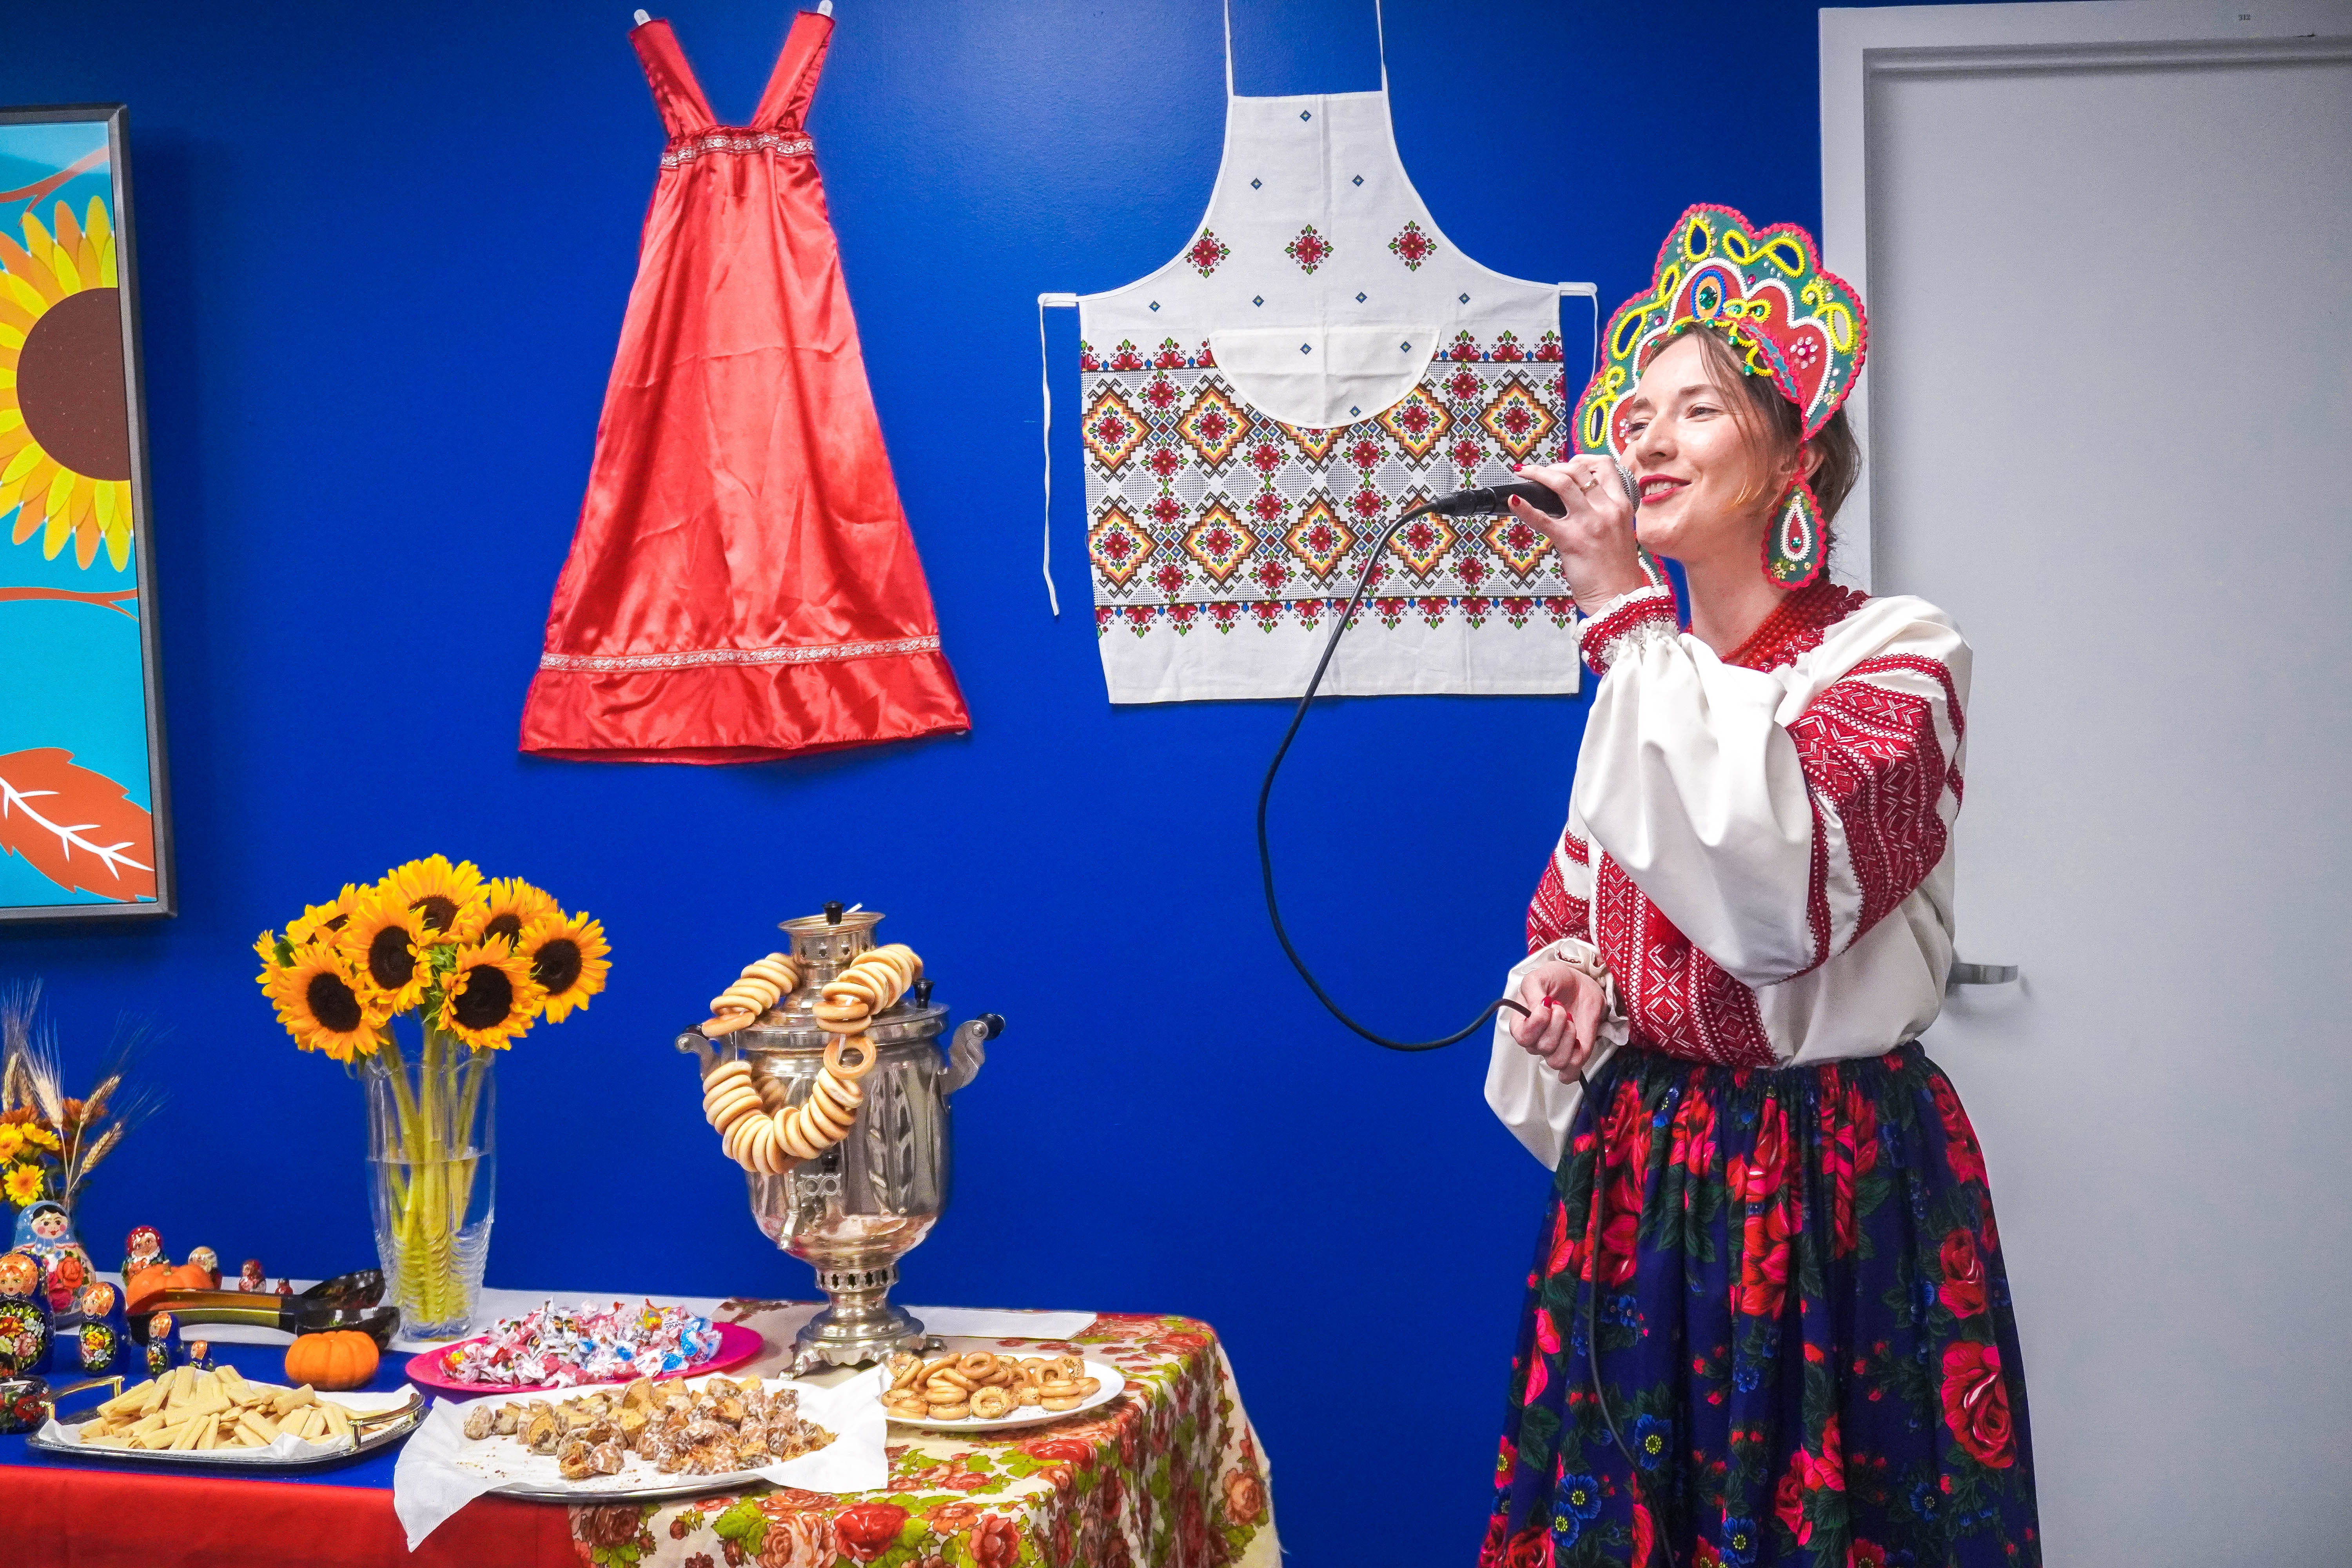 Diplomatic Language Services staff member Anastasia Tsyganok sings traditional Russian songs at the DLS 2019 Harvest Festival